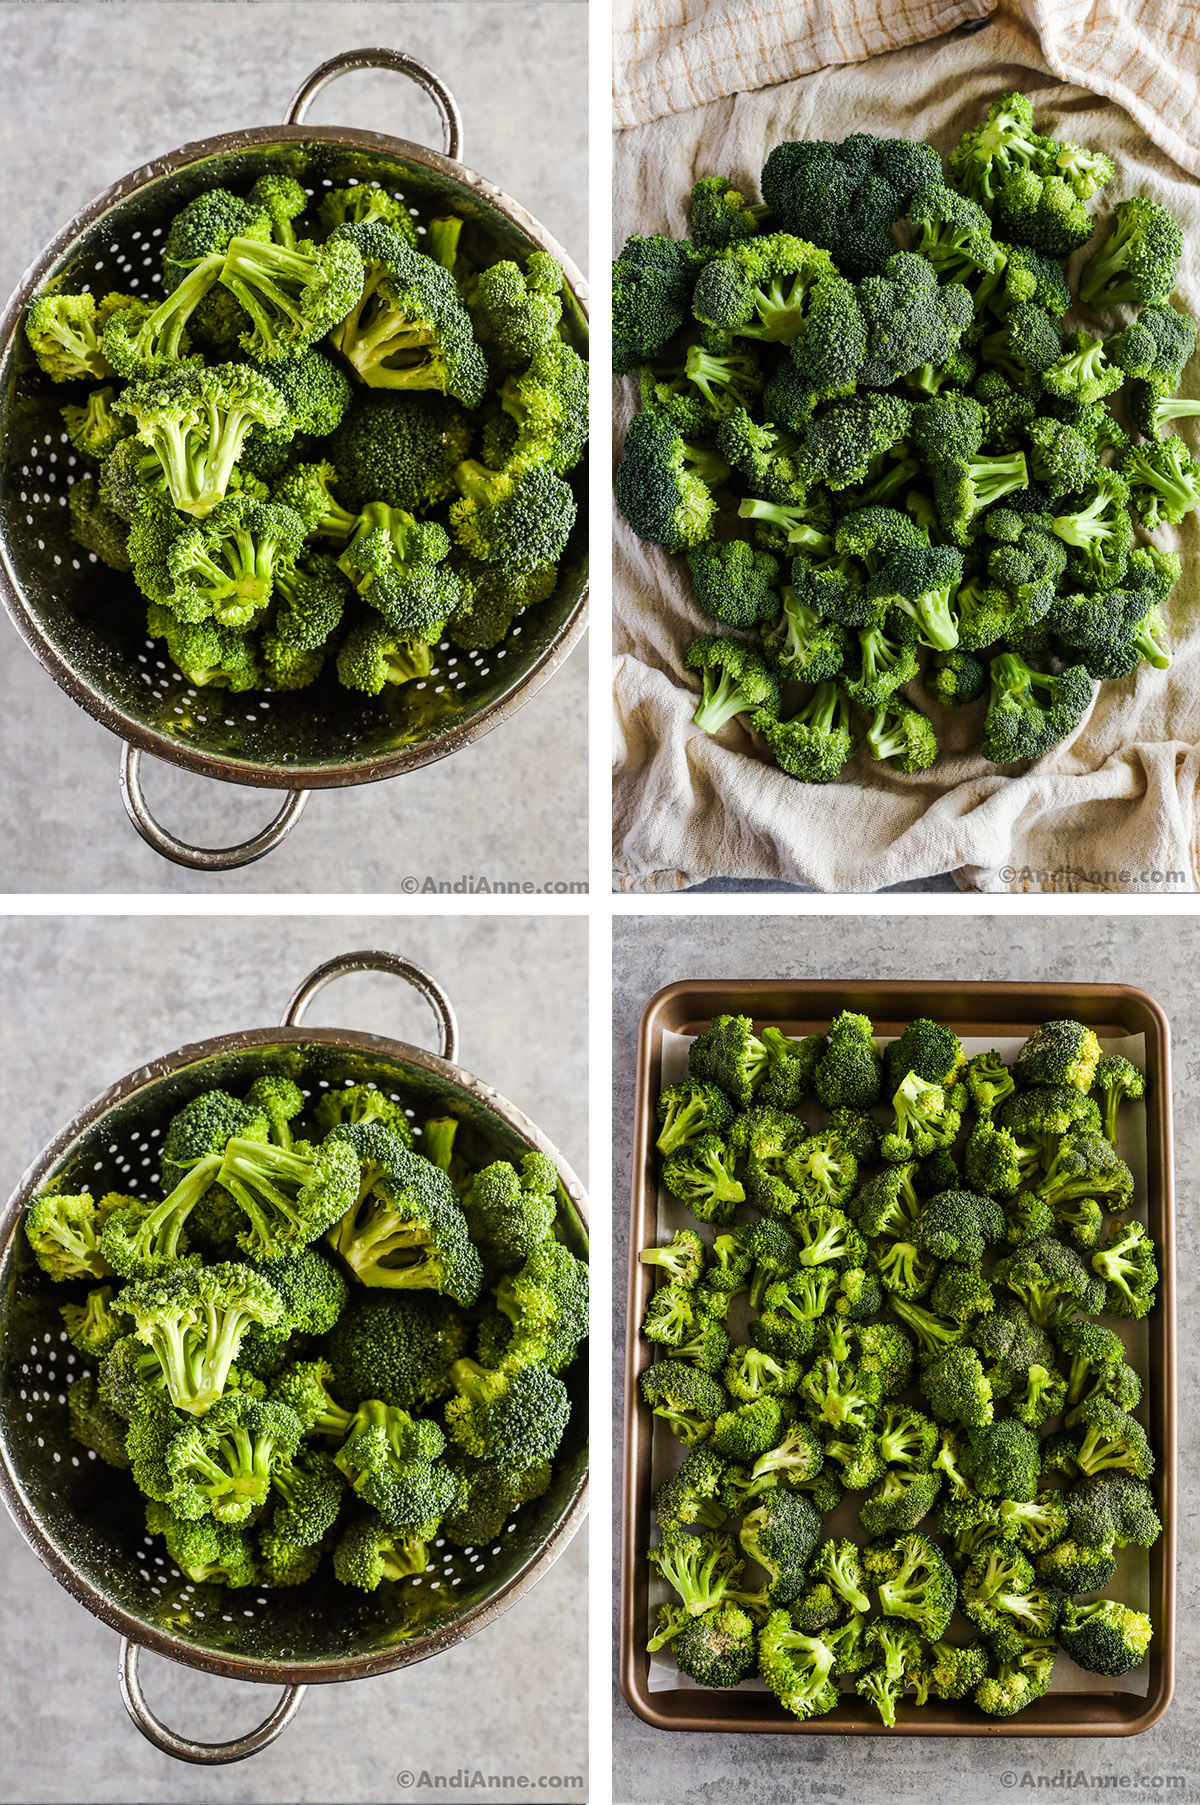 four images. 1 - broccoli in strainer. 2 - broccoli on towel drying. 3- dried broccoli resting in strainer. 4 - broccoli spread evenly in sheet pan.